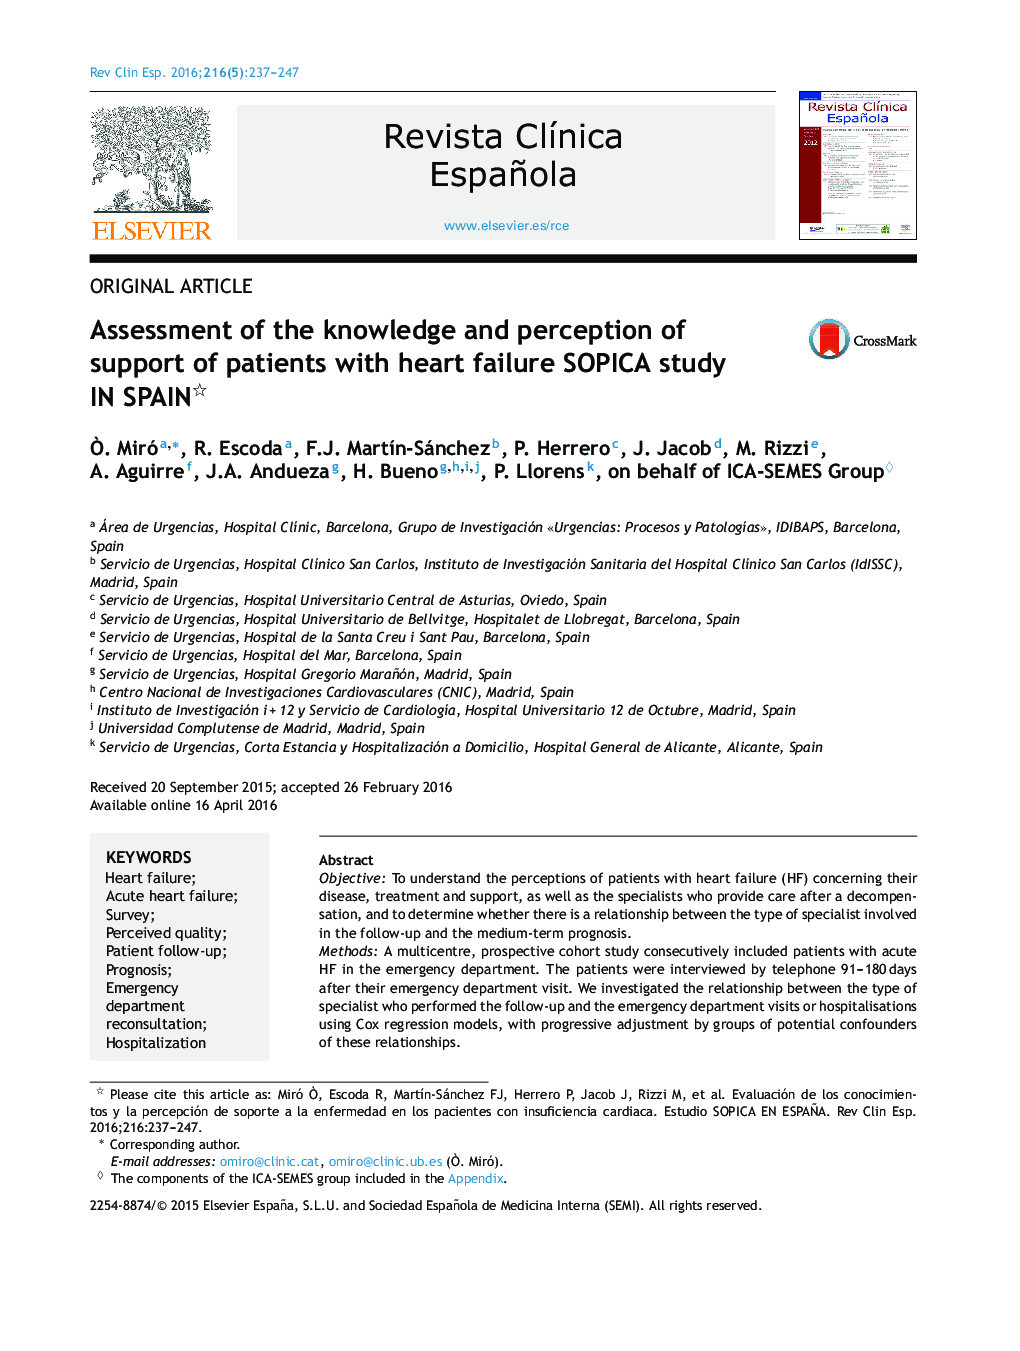 Assessment of the knowledge and perception of support of patients with heart failure SOPICA study IN SPAIN 